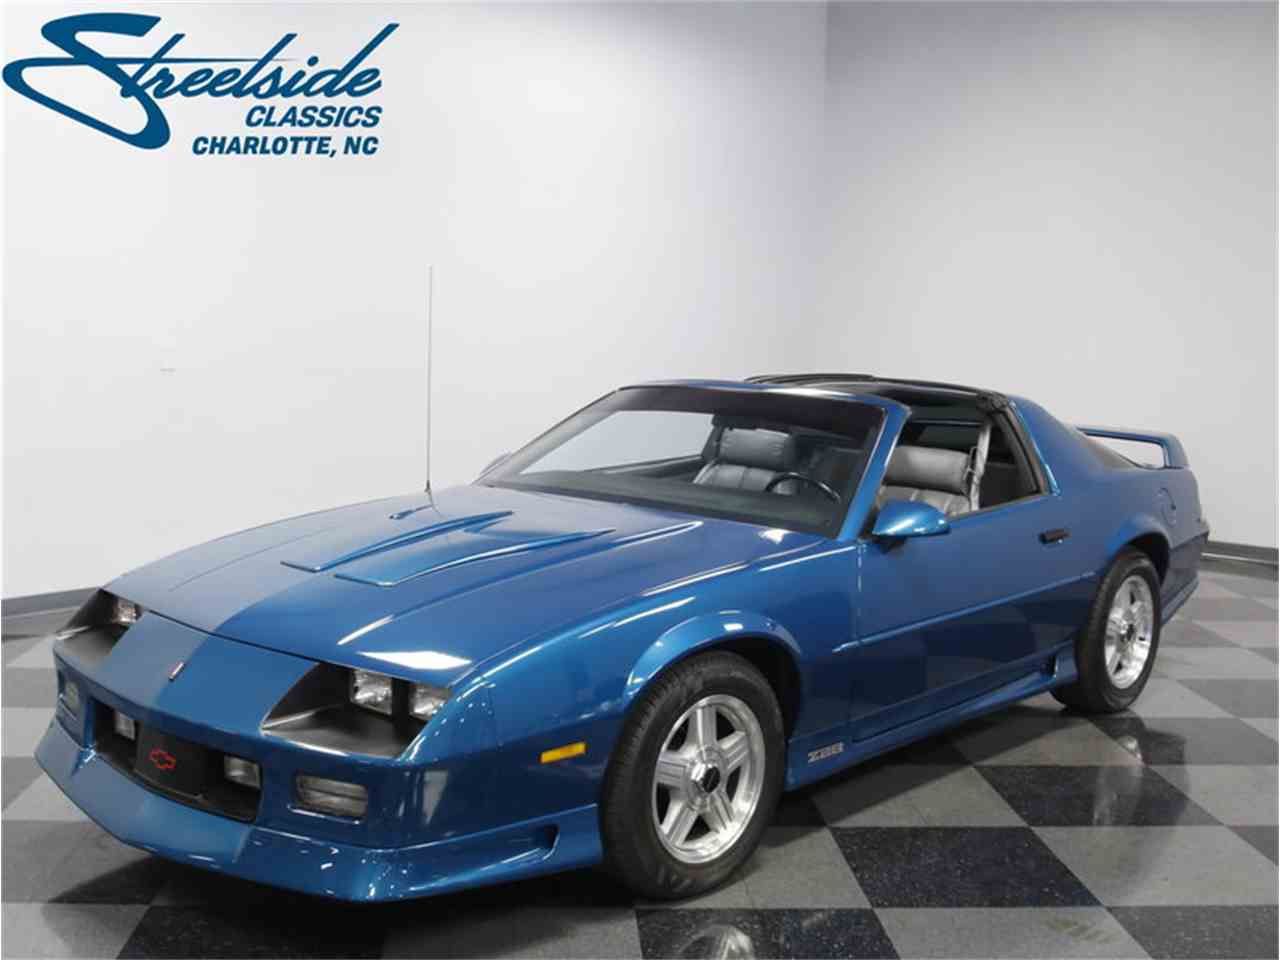 1993 Chevrolet Camaro Z28 0-60 Times, Top Speed, Specs, Quarter Mile, and  Wallpapers - MyCarSpecs United States / USA